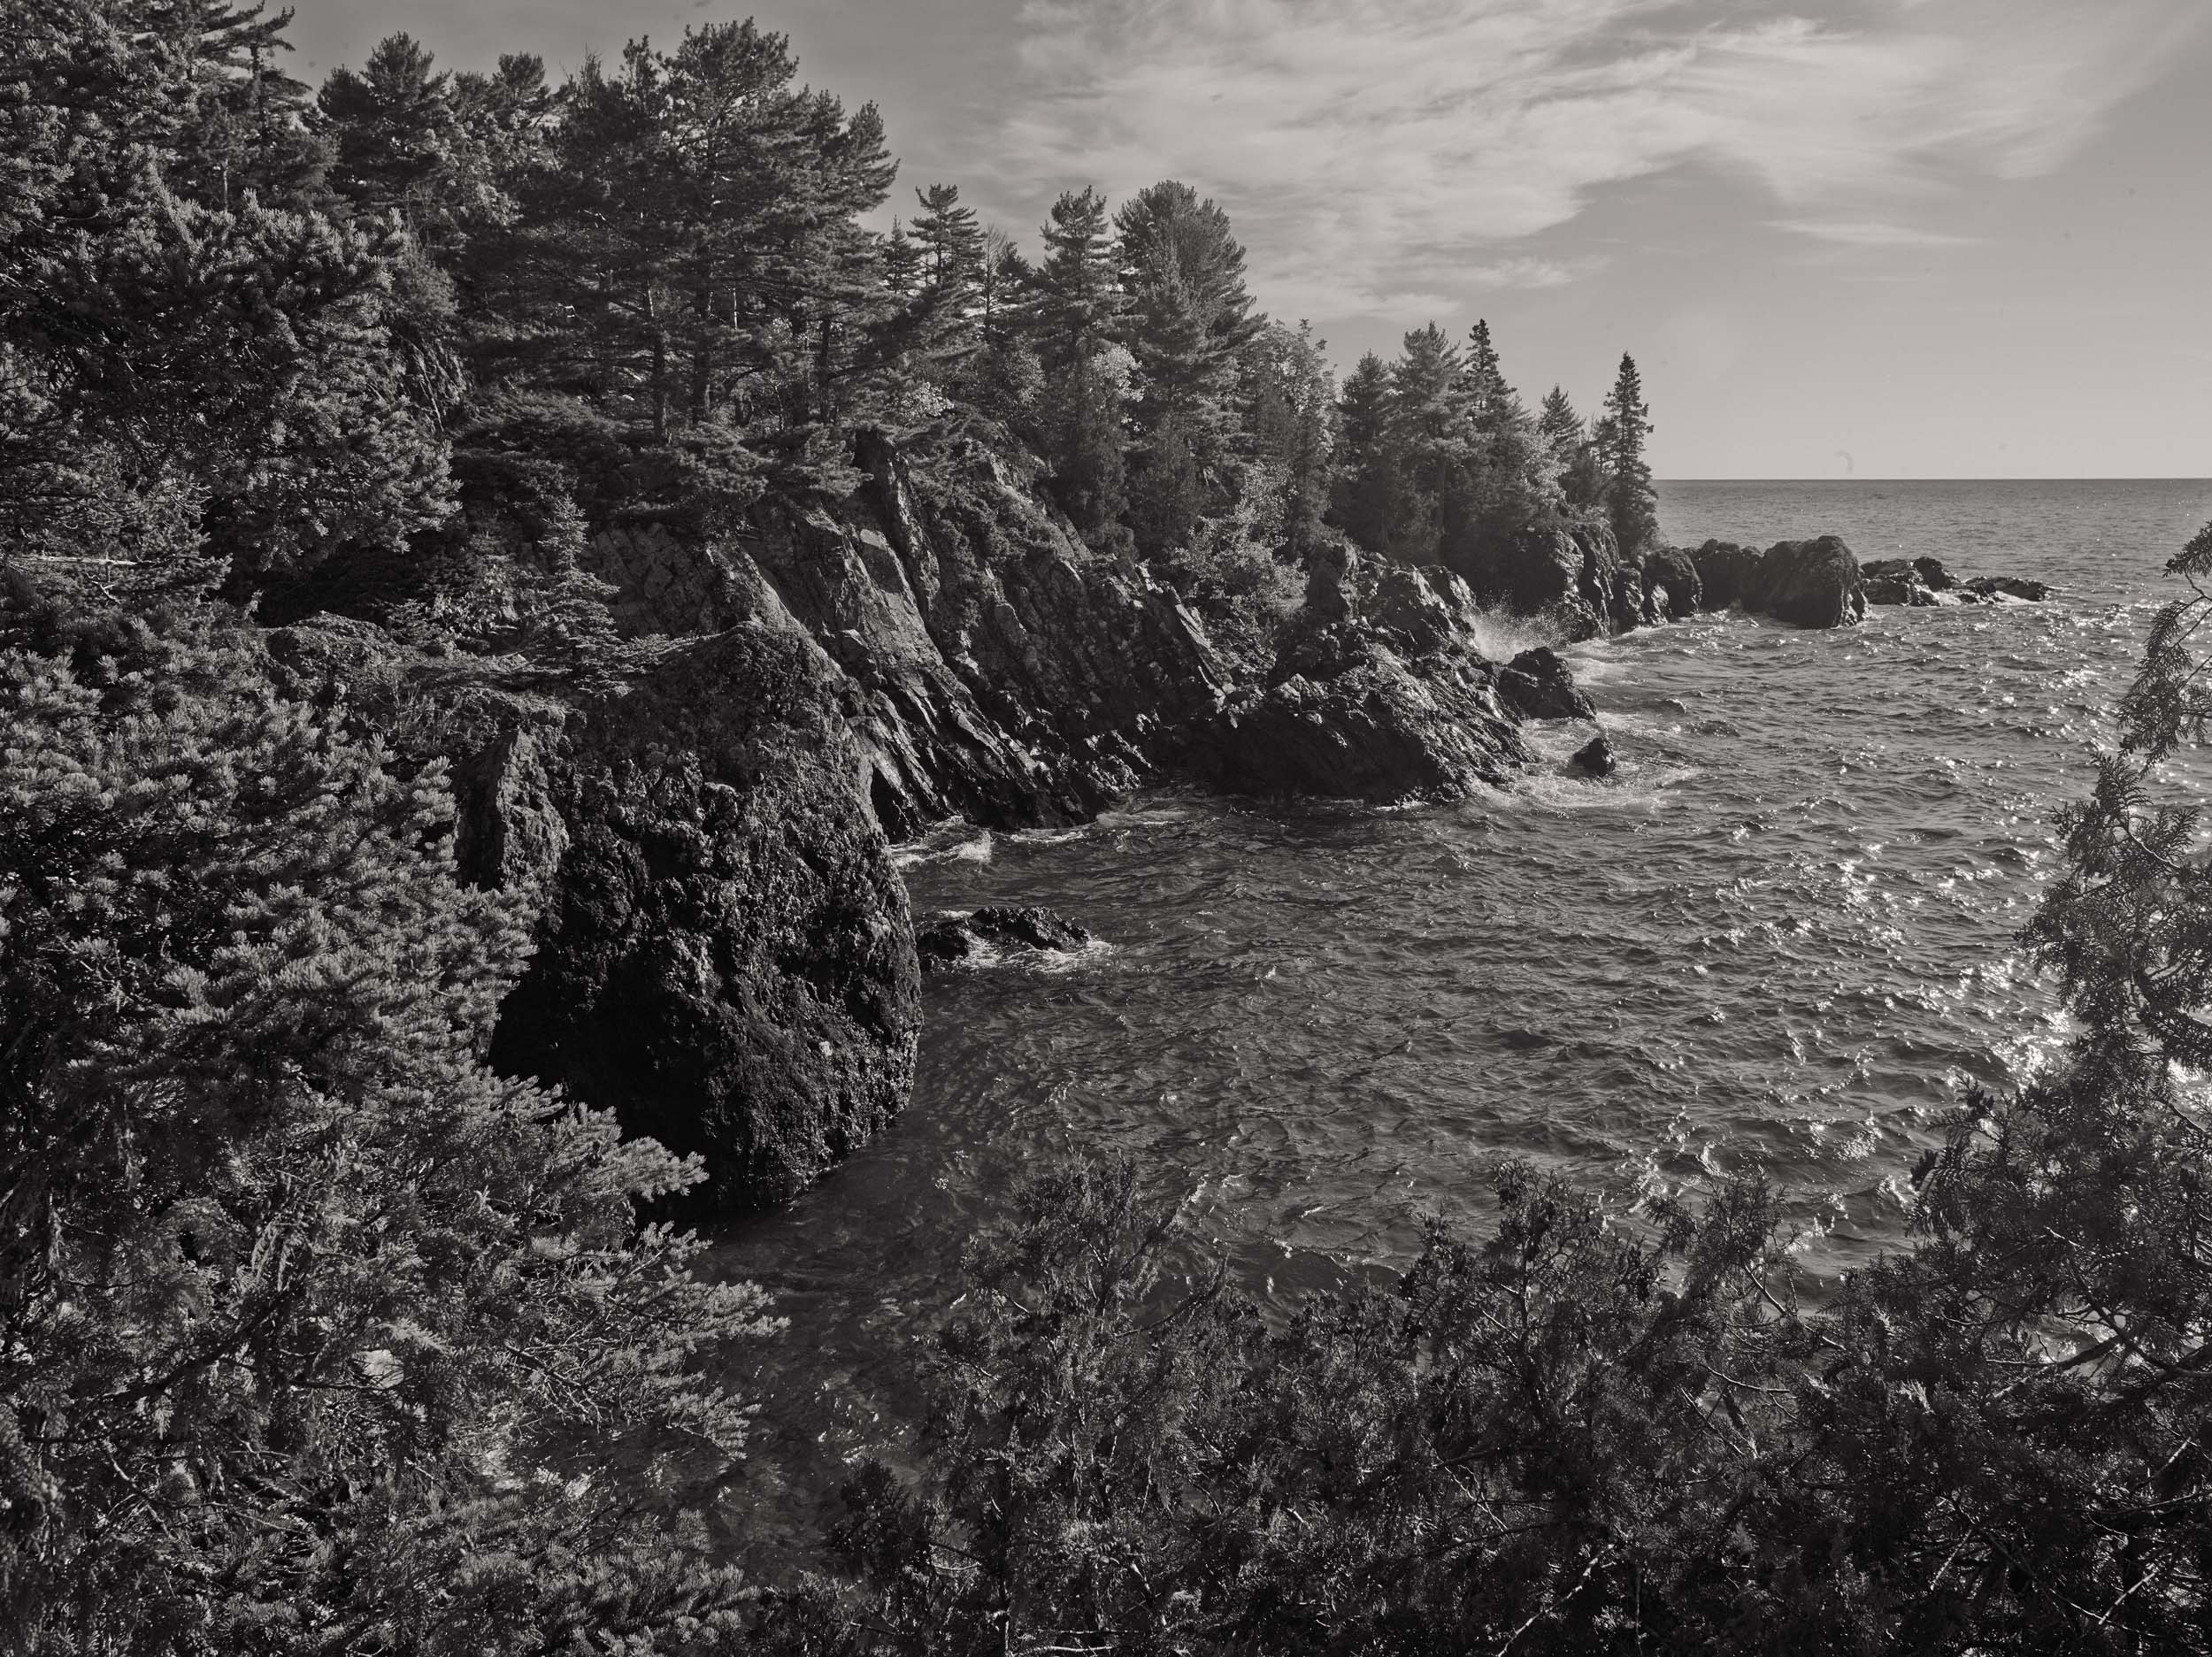 Copper Harbor. One of Michigan's most beautiful and remote spots. Fish Cove is at the tip of the Keweenaw Penninsula 15 miles down a jeep trail. It's secluded, rugged. Michigan Landscape Photography.